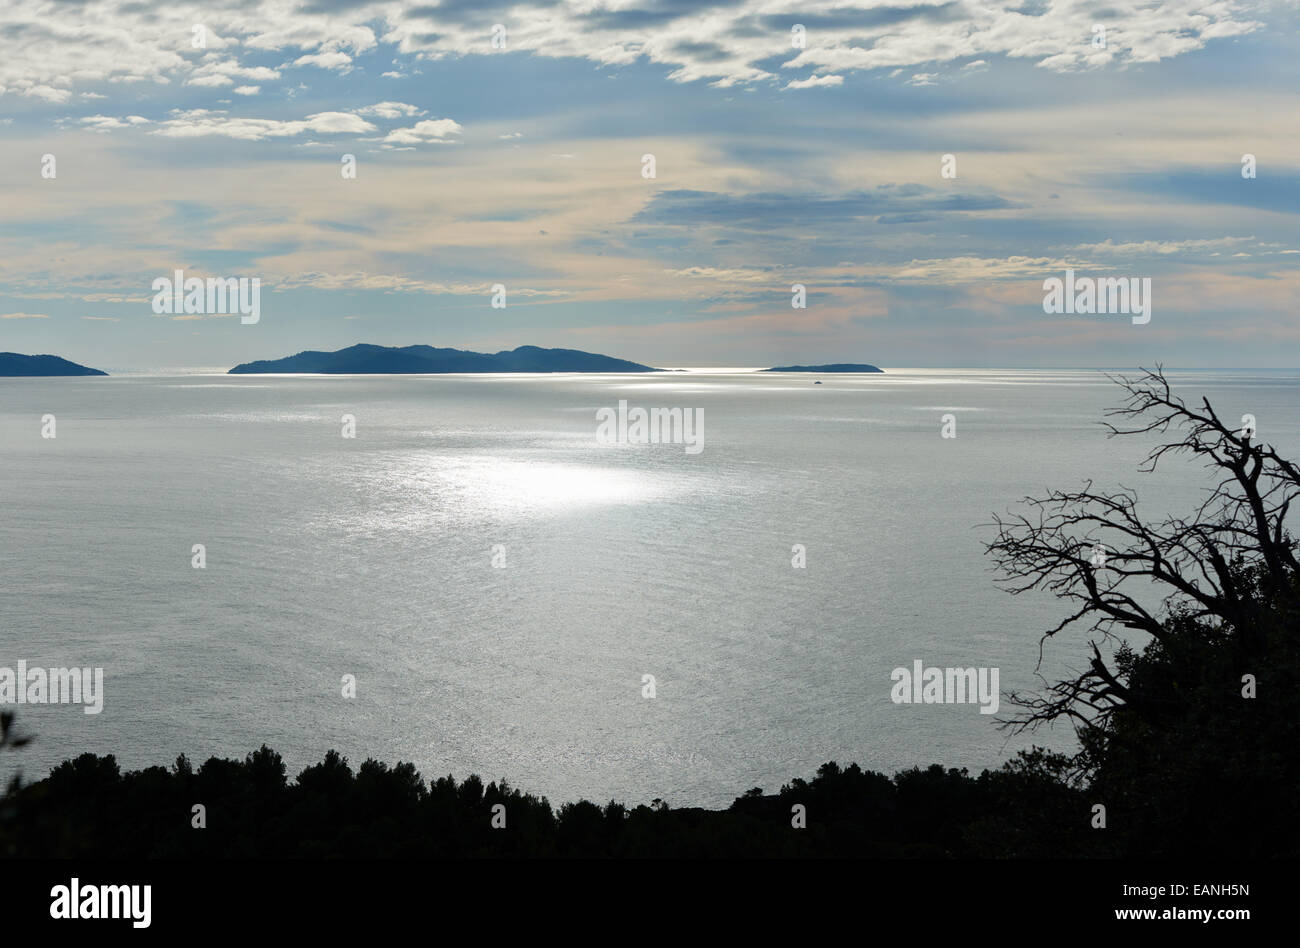 Seascape with little island in calm Mediterranean sea water on background of sky with beautiful clouds Stock Photo